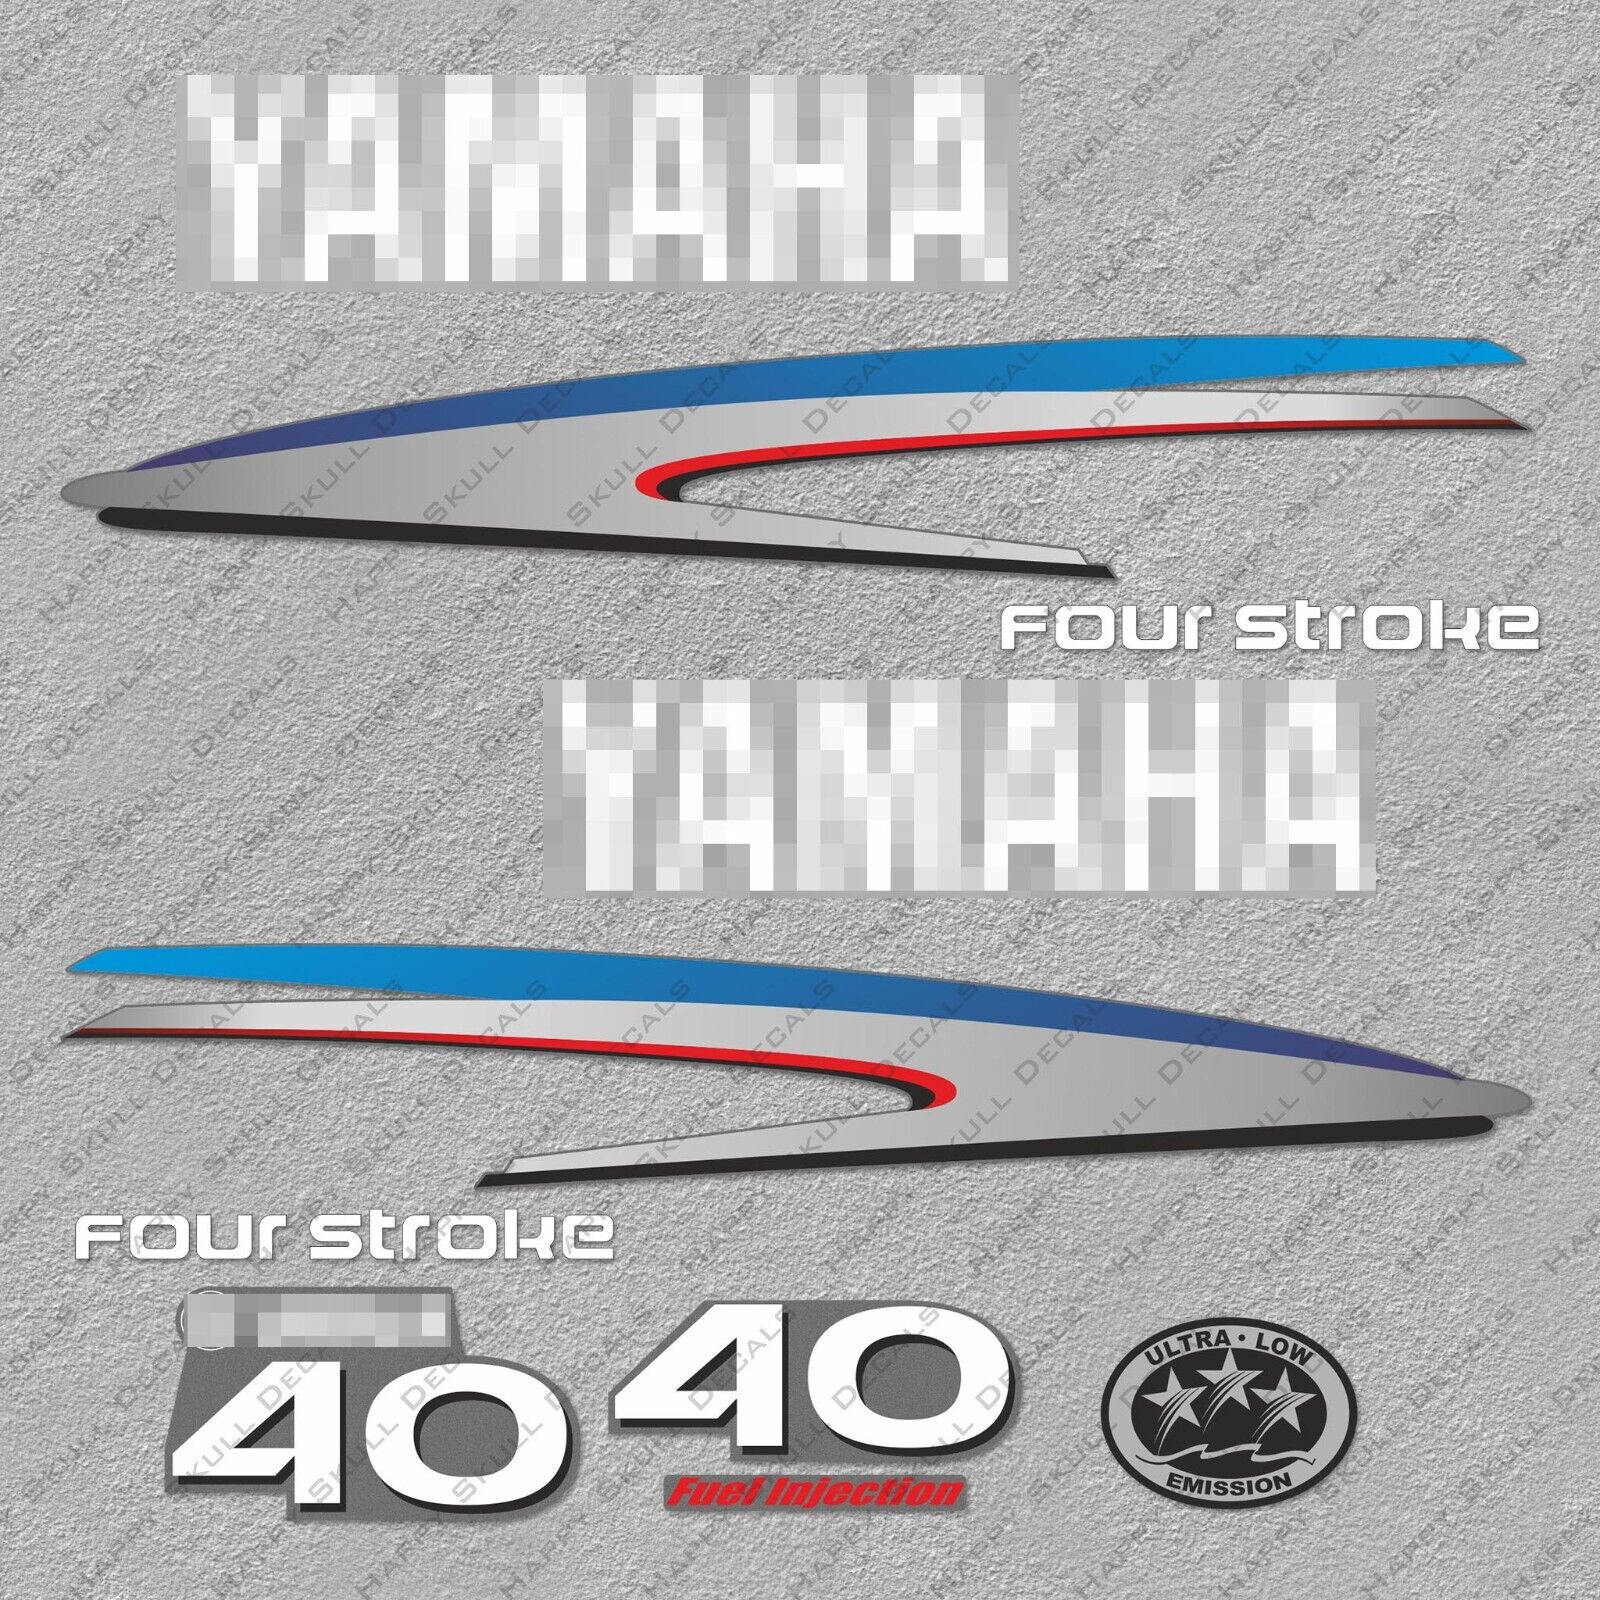 Yamaha 40HP Four Stroke Outboard Engine Decals Sticker Set reproduction 40 HP